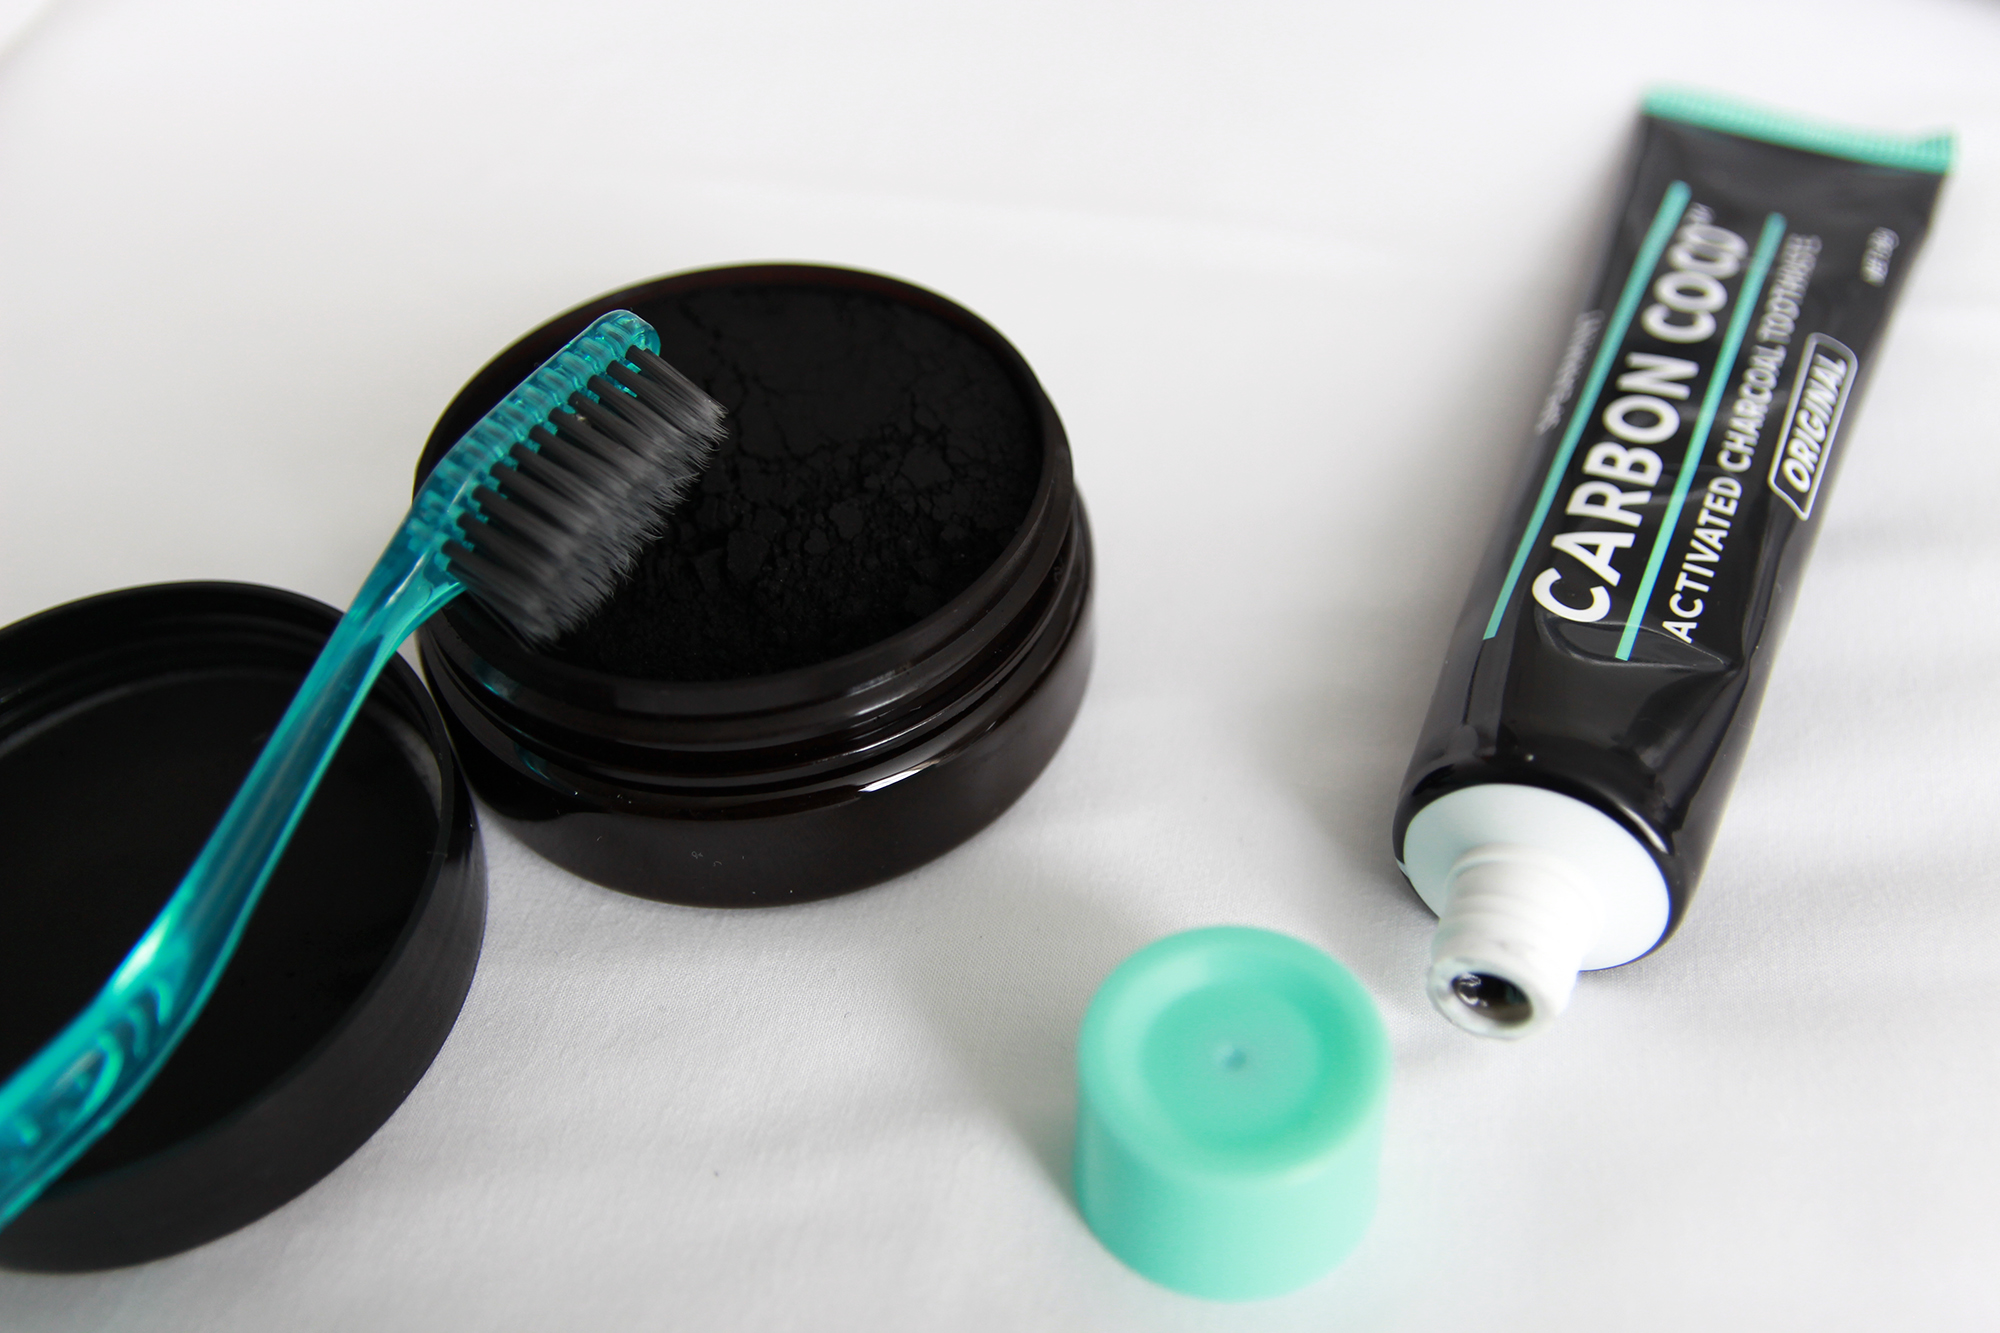 carbon-coco-ultimate-whitening-kit-review